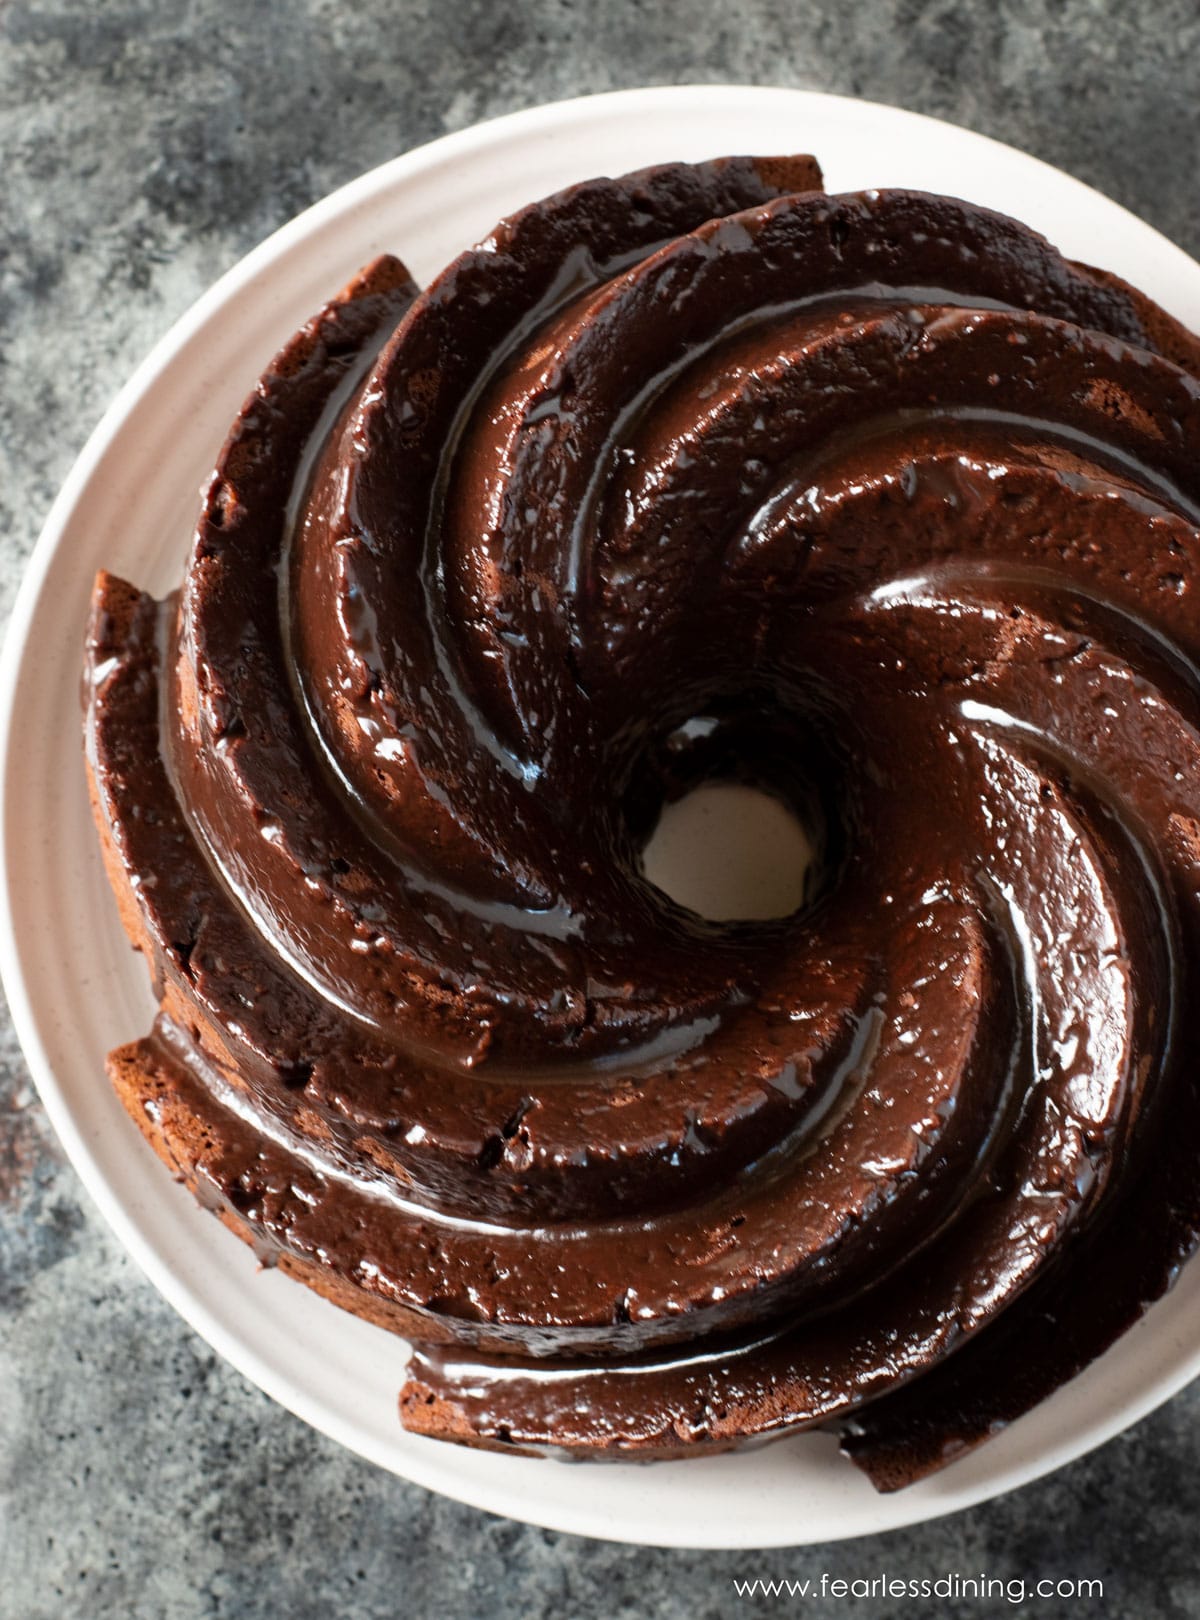 The top view of a chocolate pound cake topped in chocolate ganache.